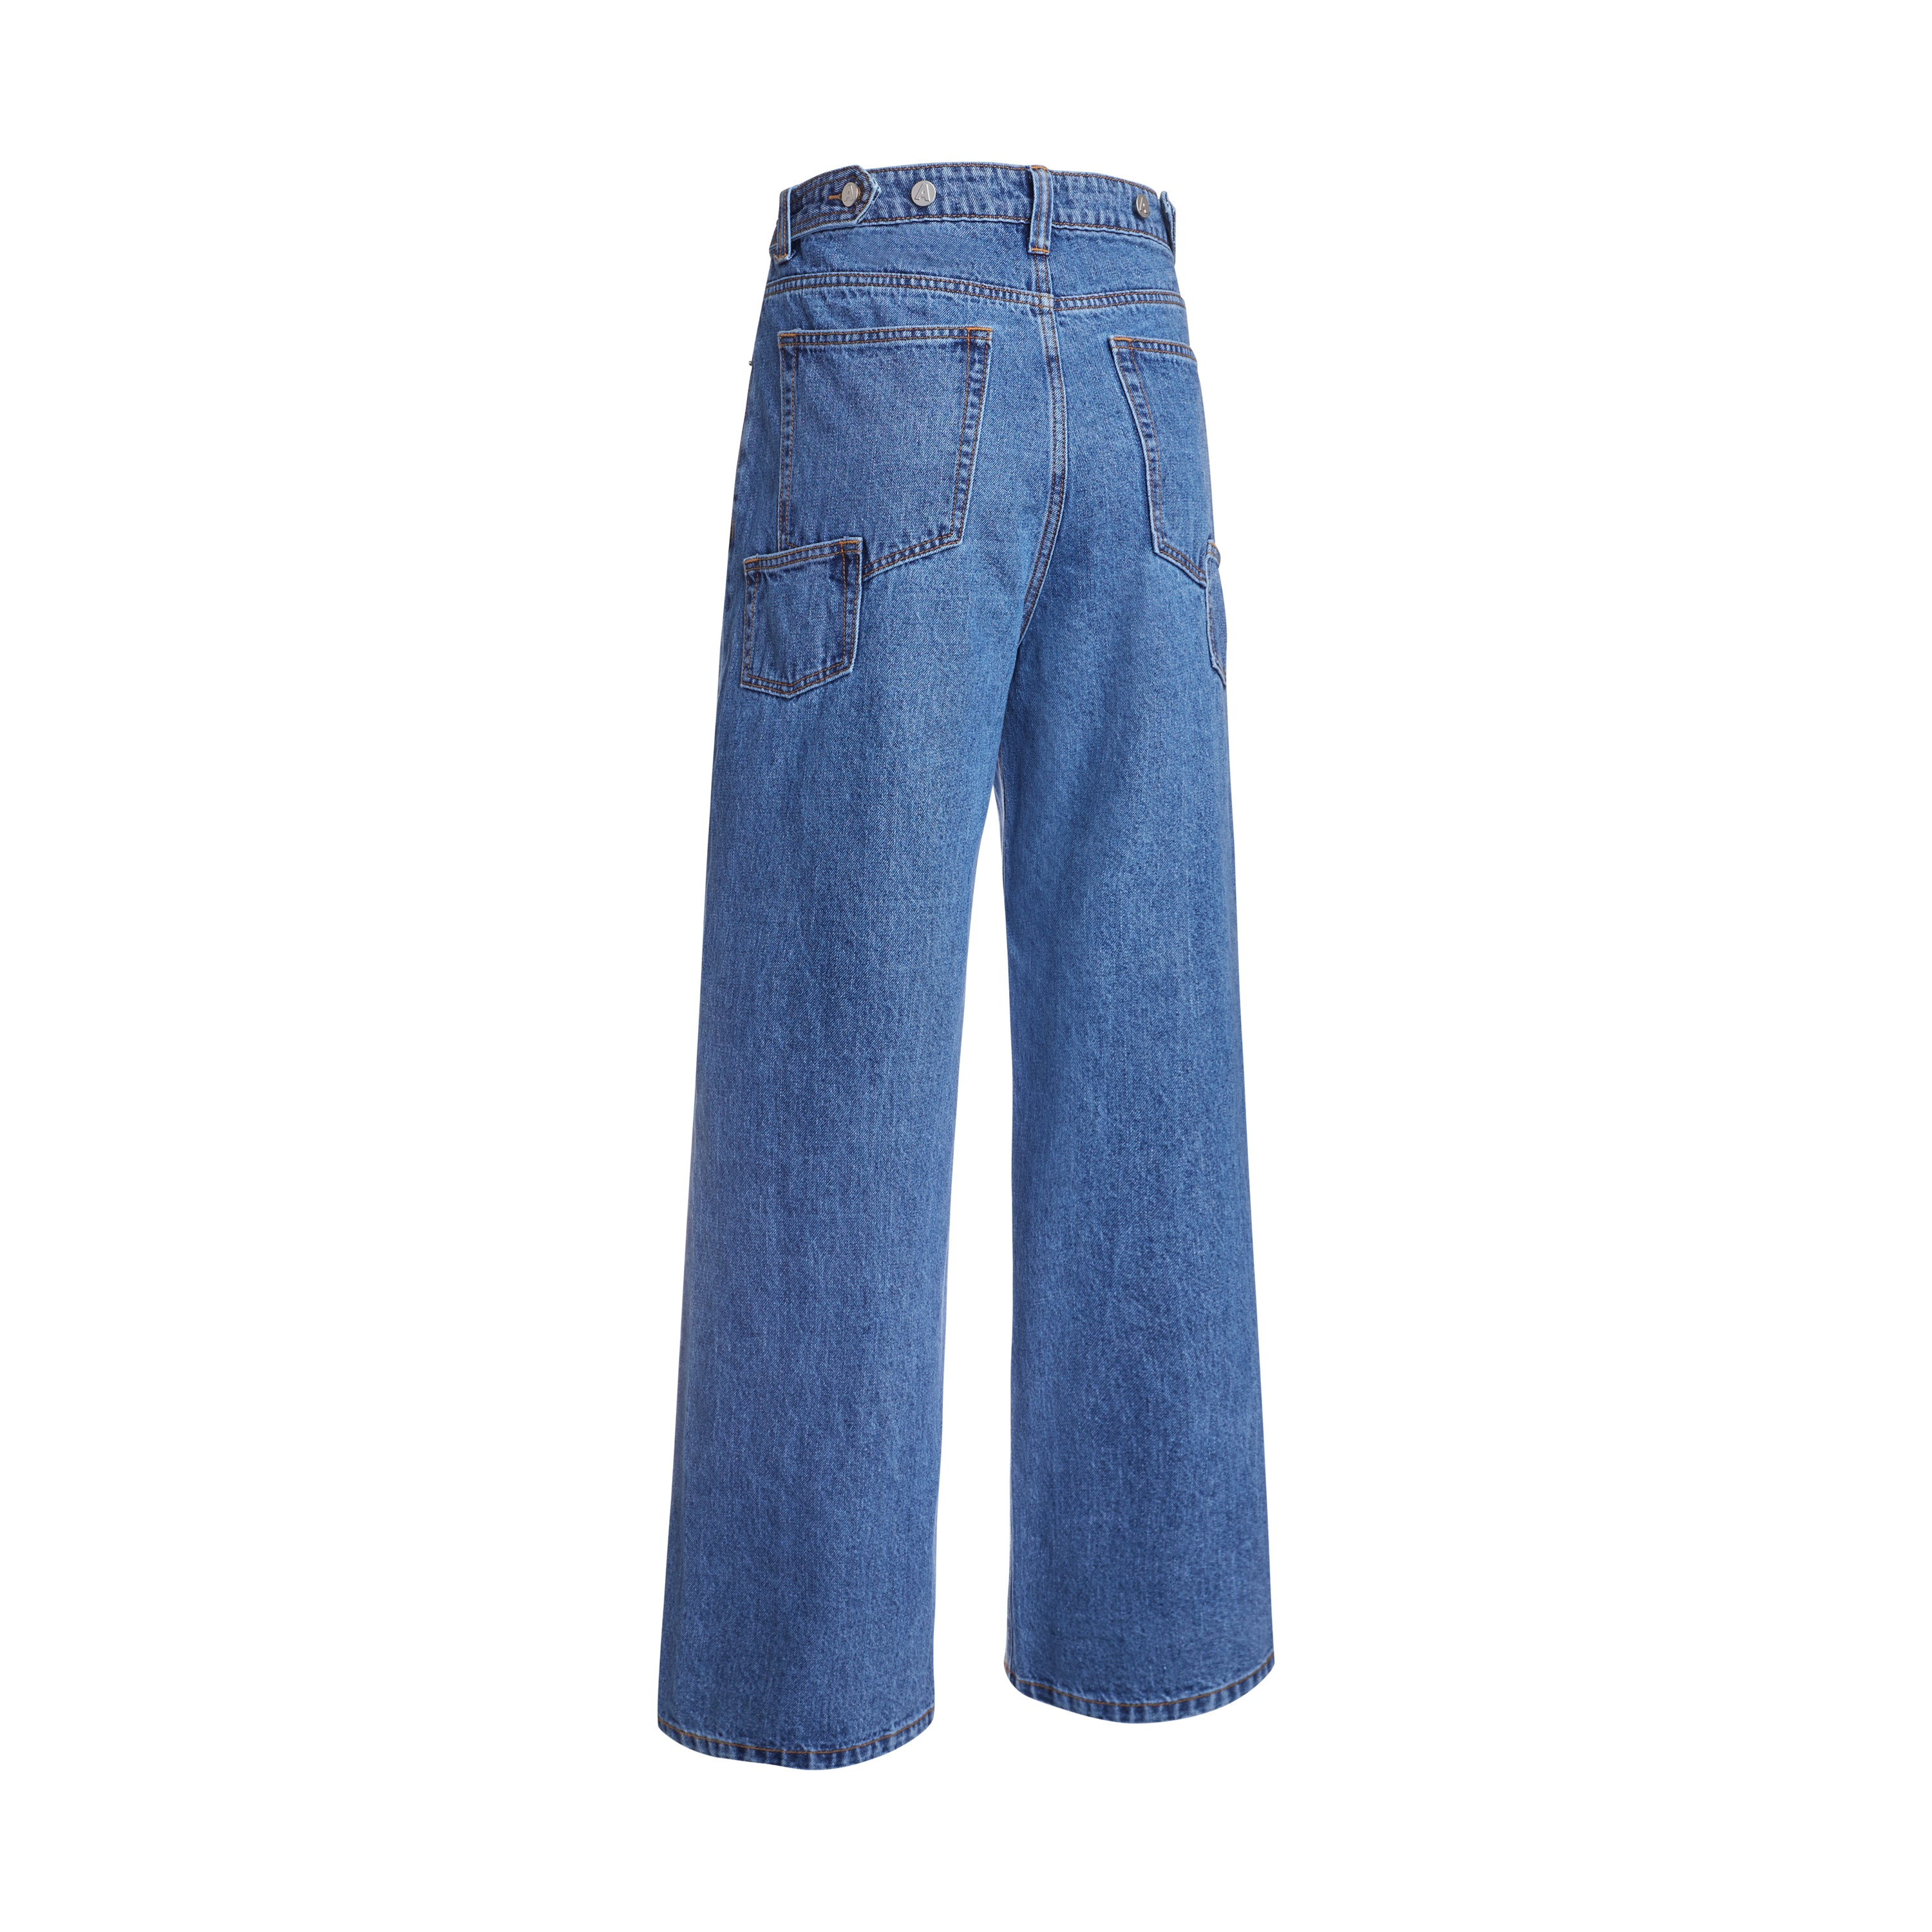 AA RELAX JEANS - BLUE